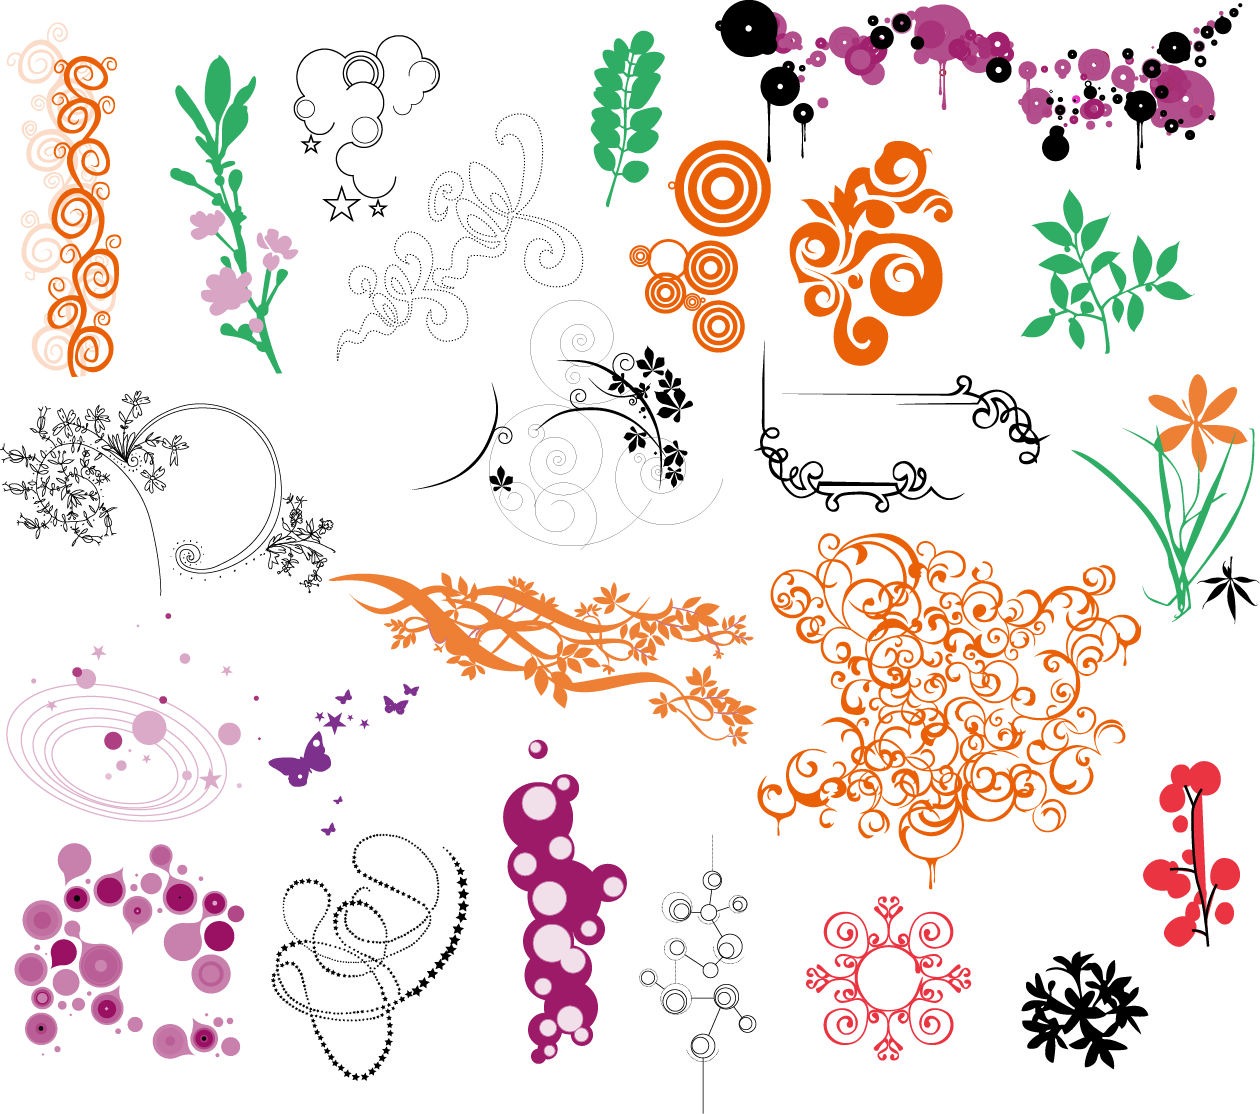 17-all-free-vector-download-images-download-free-vector-graphics